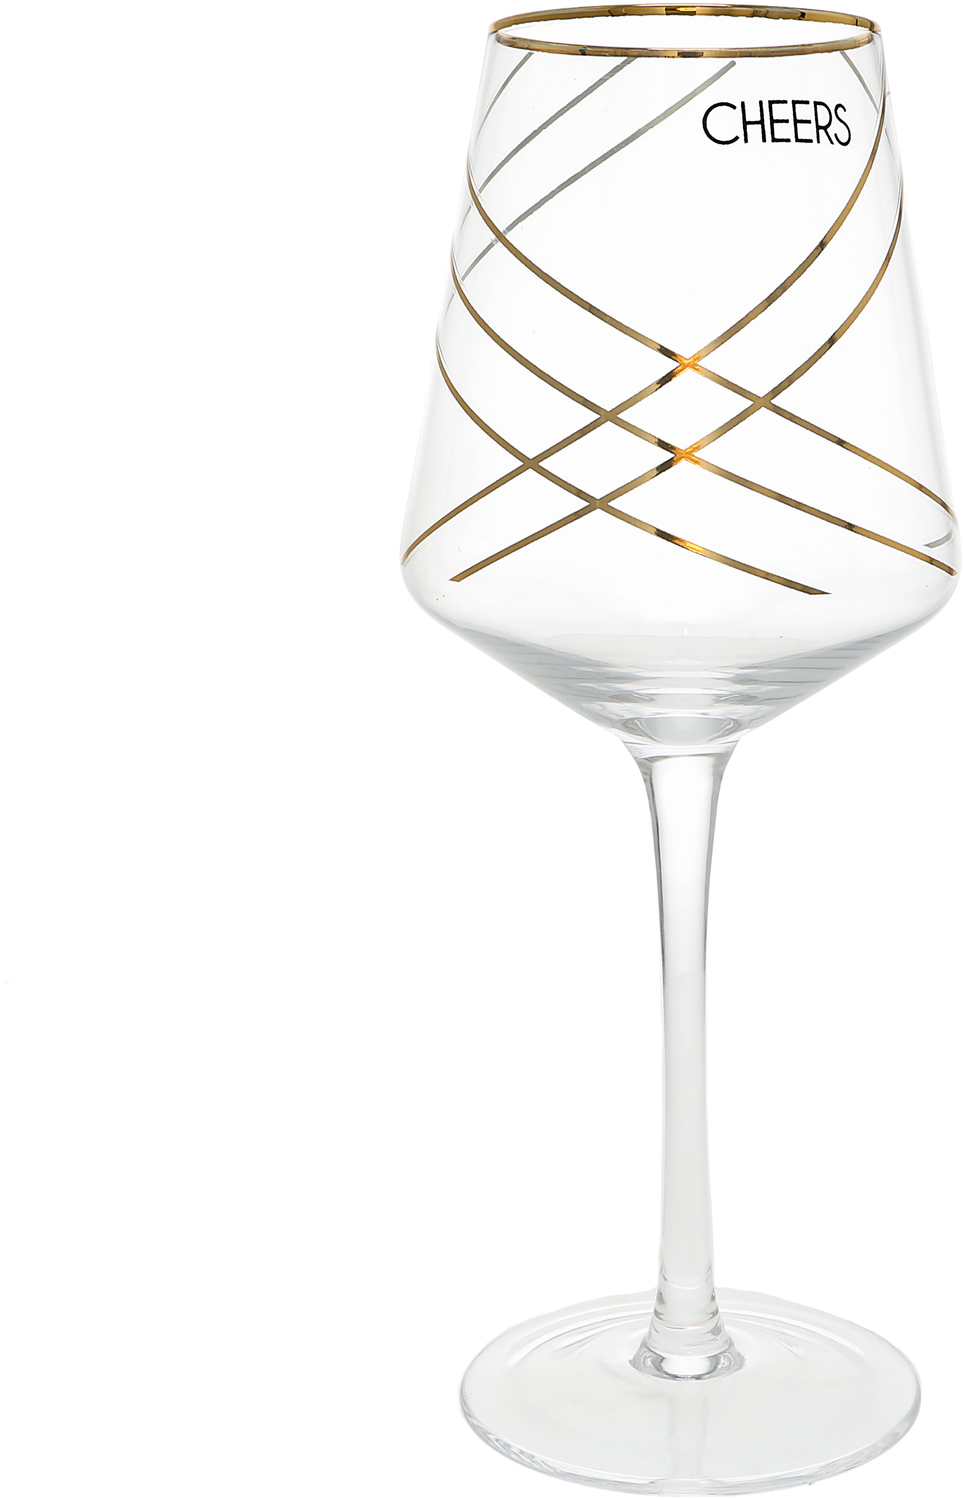 Cheers Crosshatch by Hostess with the Mostess - Cheers Crosshatch - 17 oz Wine Glass